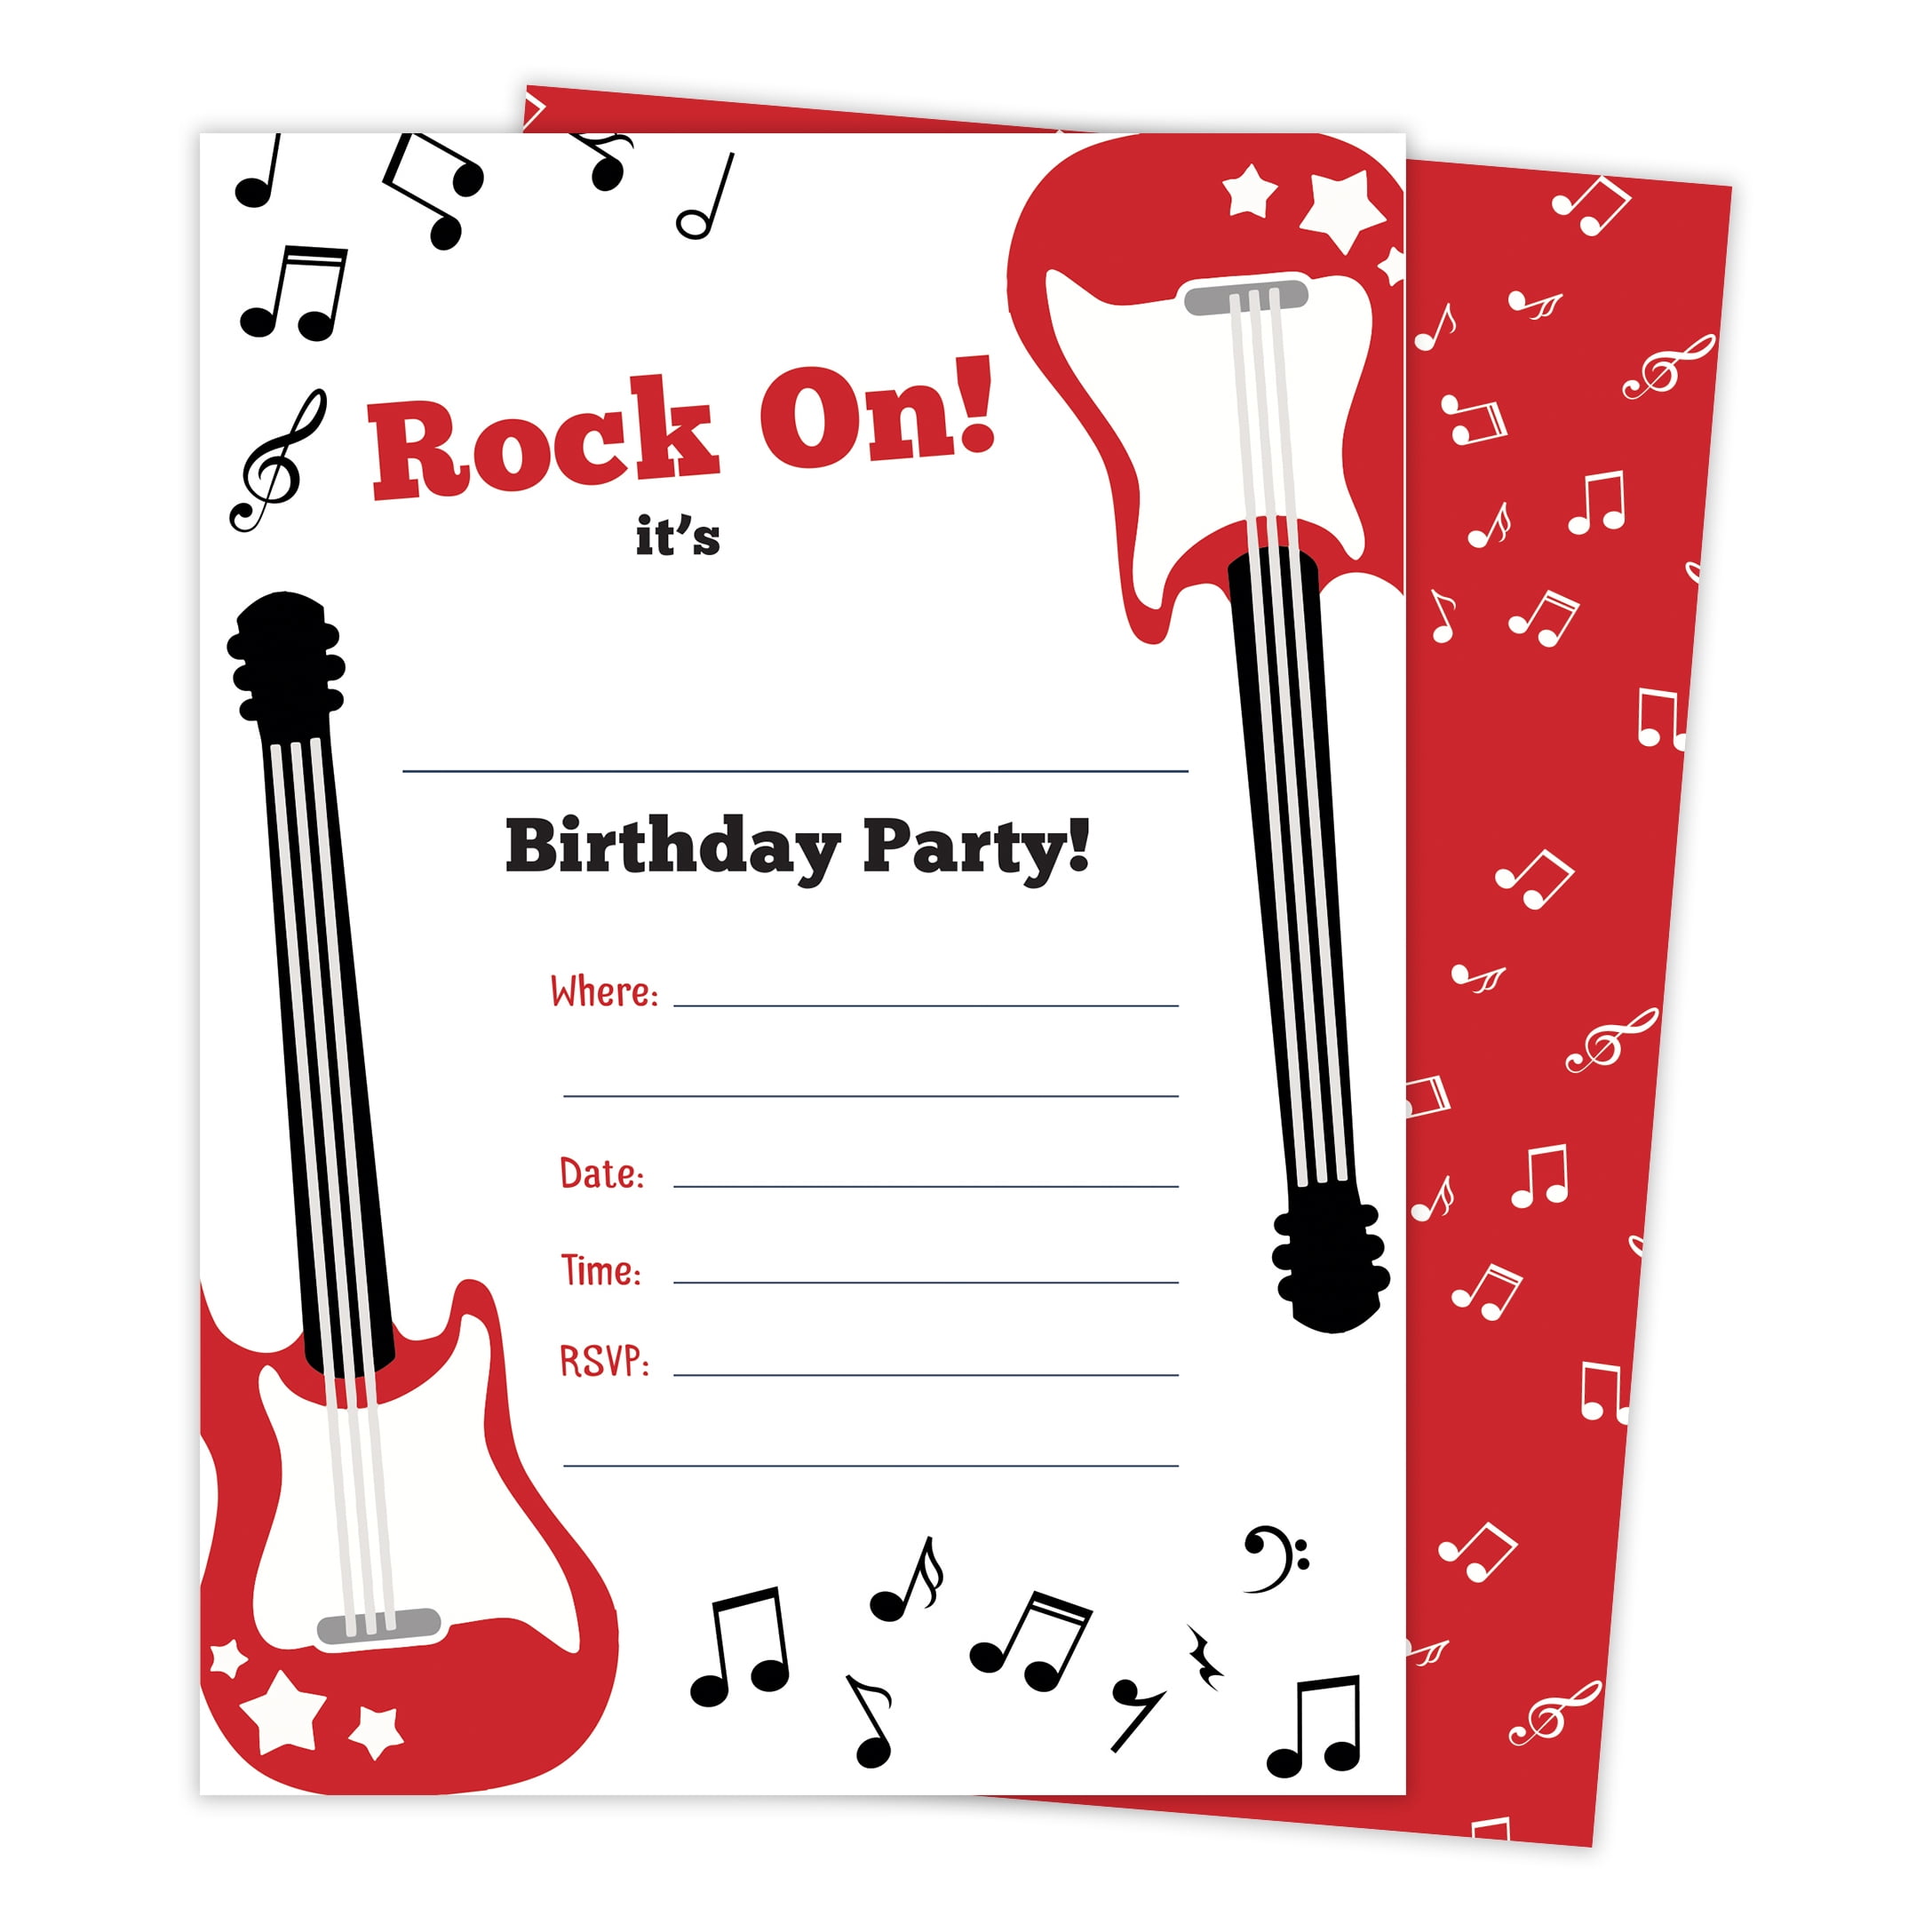 25 Count Guitar 2 Music Happy Birthday Invitations Invite Cards 25ct With Envelopes and Seal Stickers Vinyl Boys Girls Kids Party